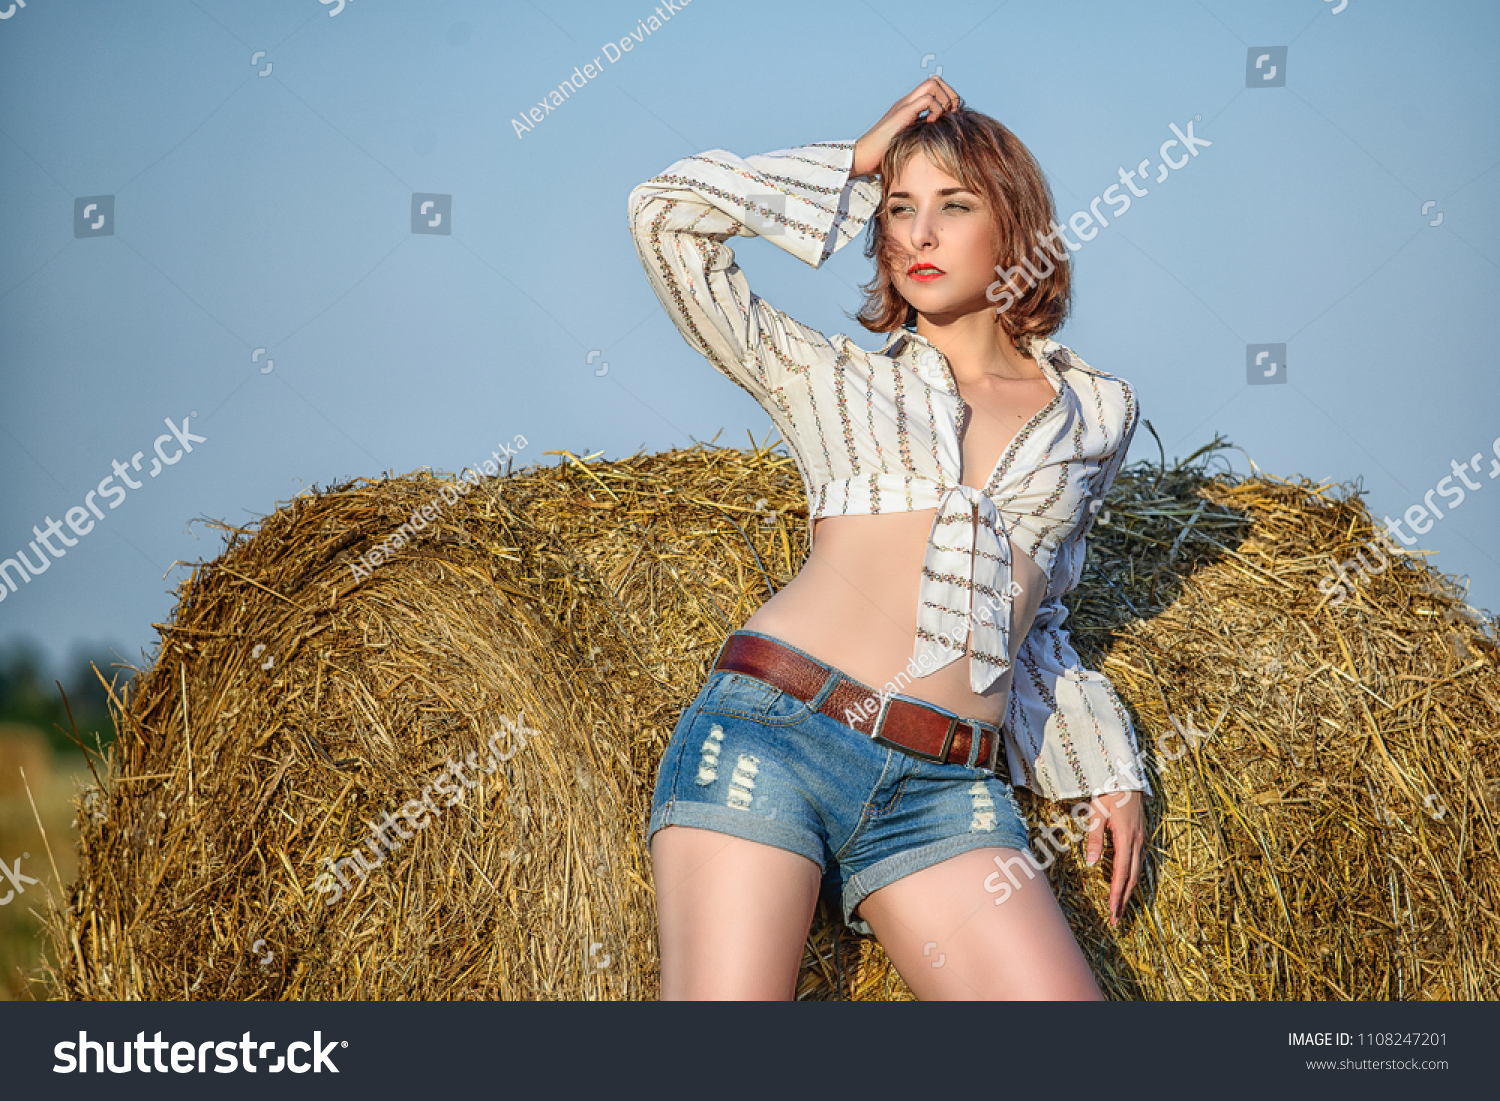 Nude young girls country